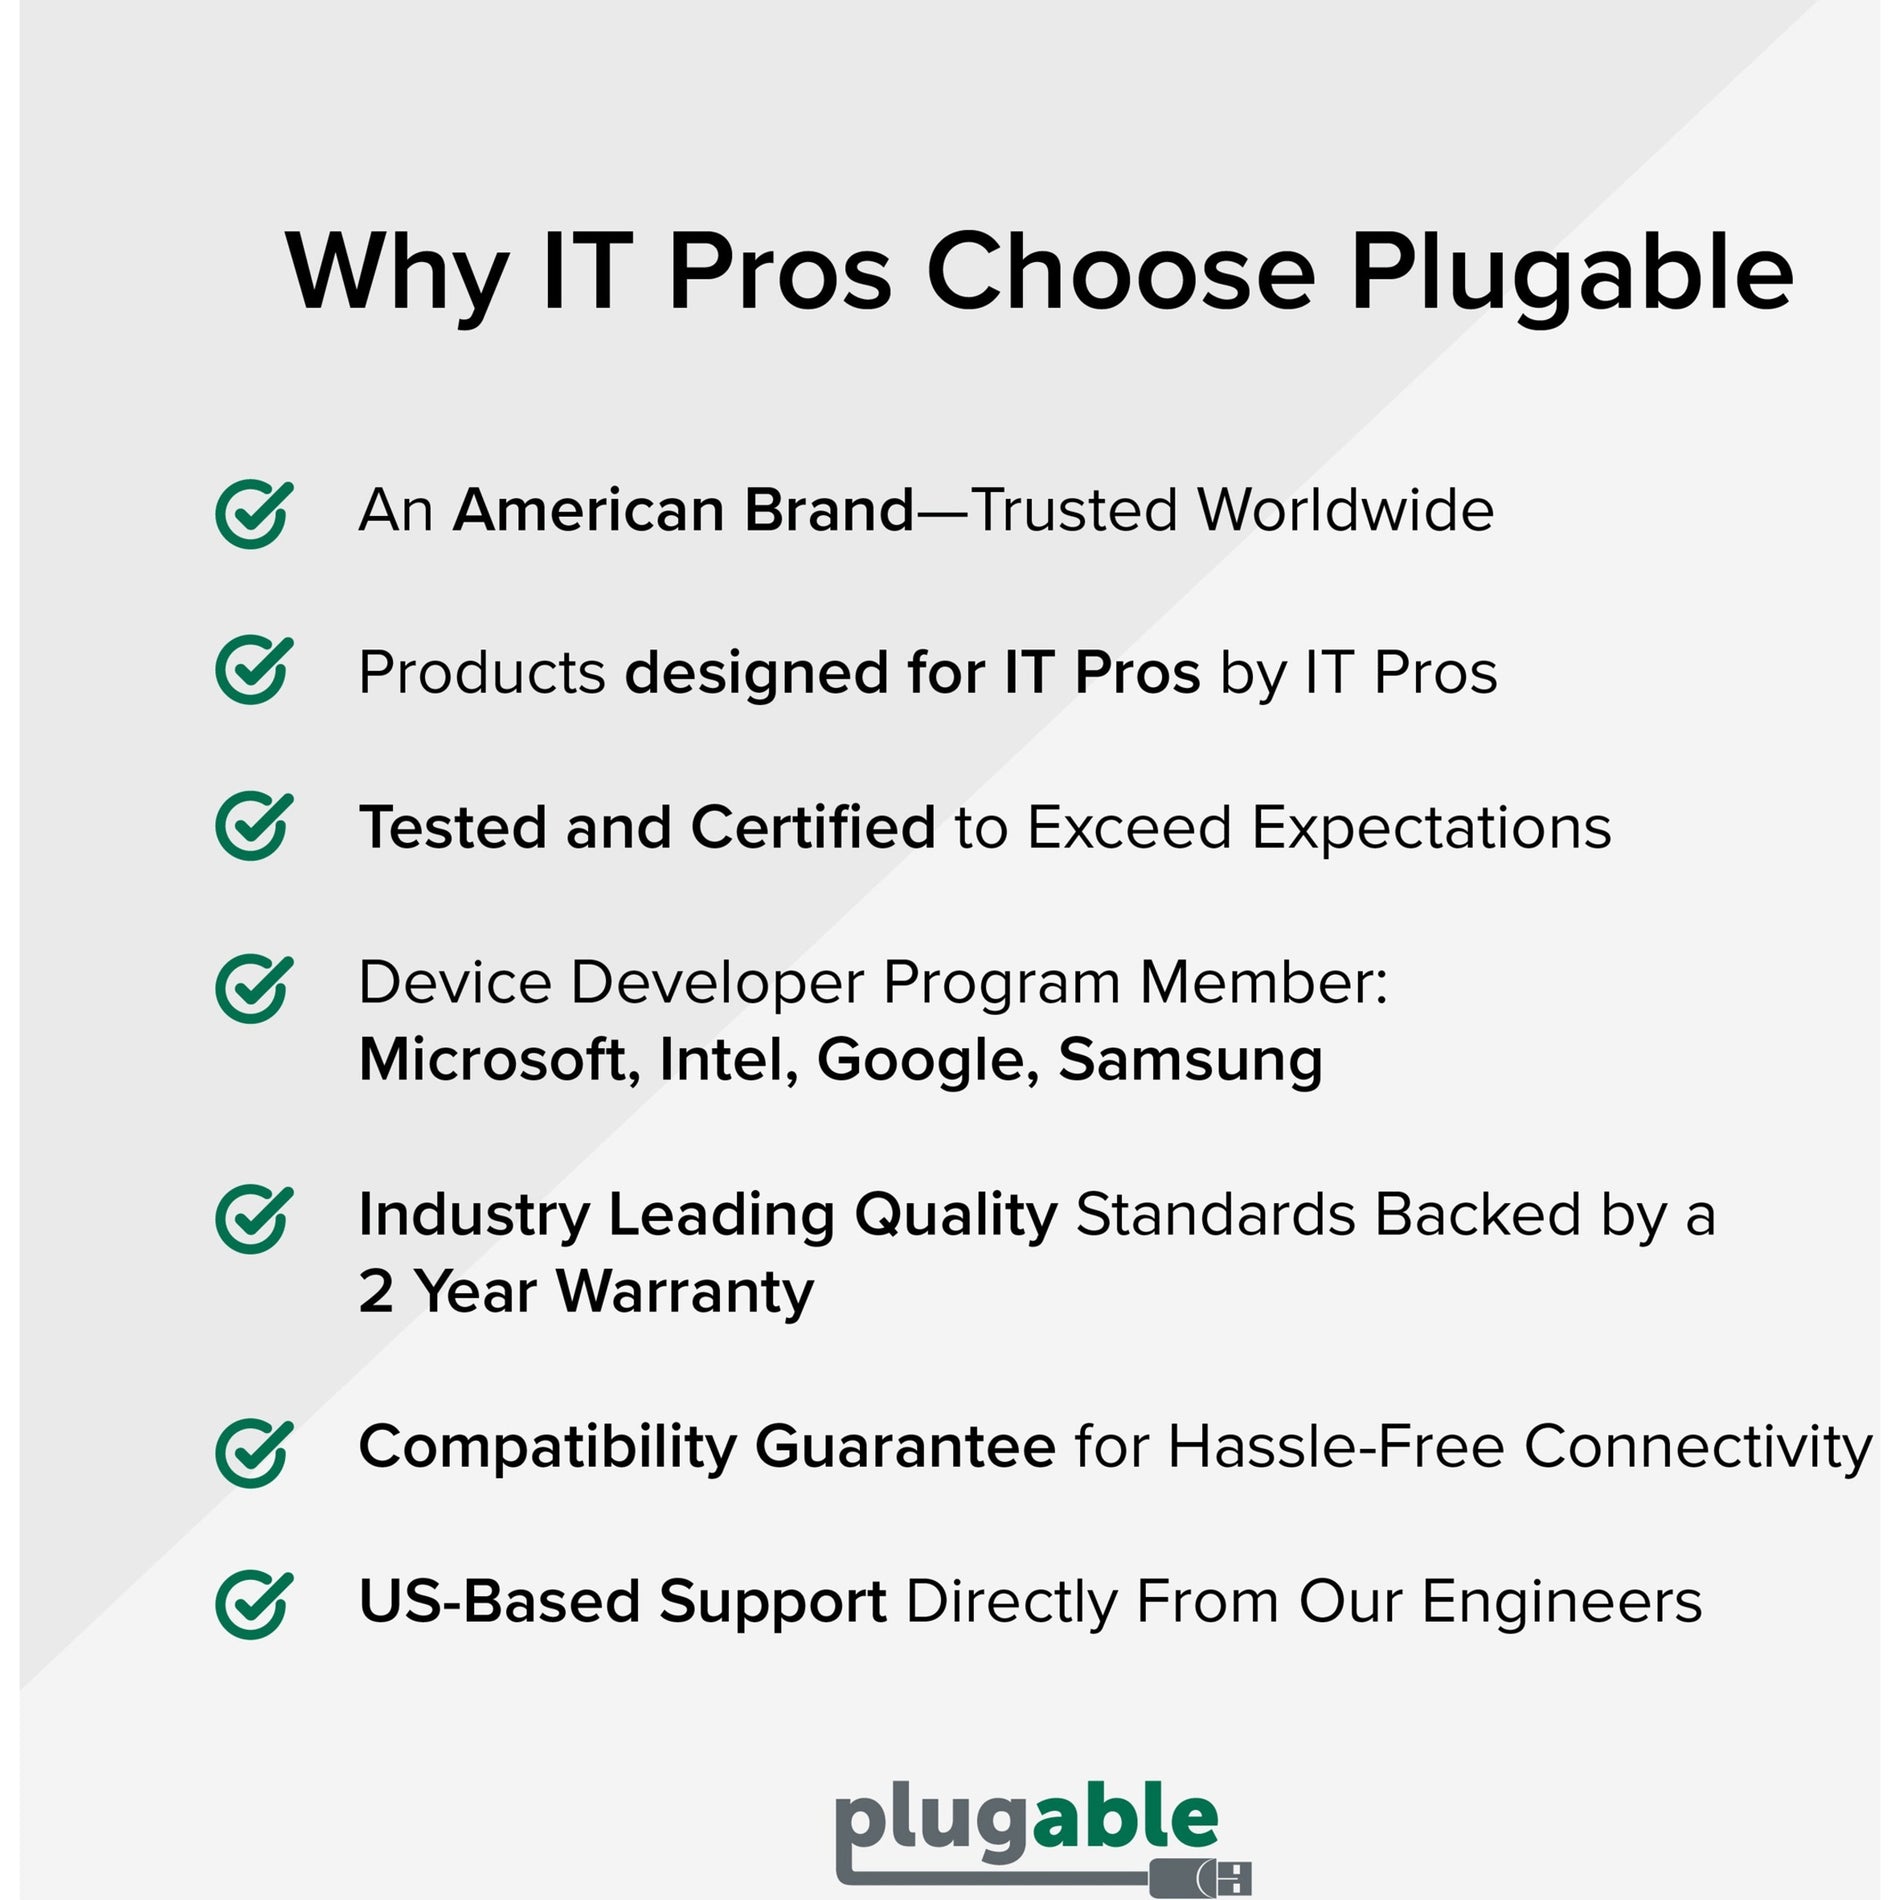 Plugable USB3-5M-D USB 3.0 5M (16ft) Extension Cable with Power Adapter, Extend Your USB Connection with Ease